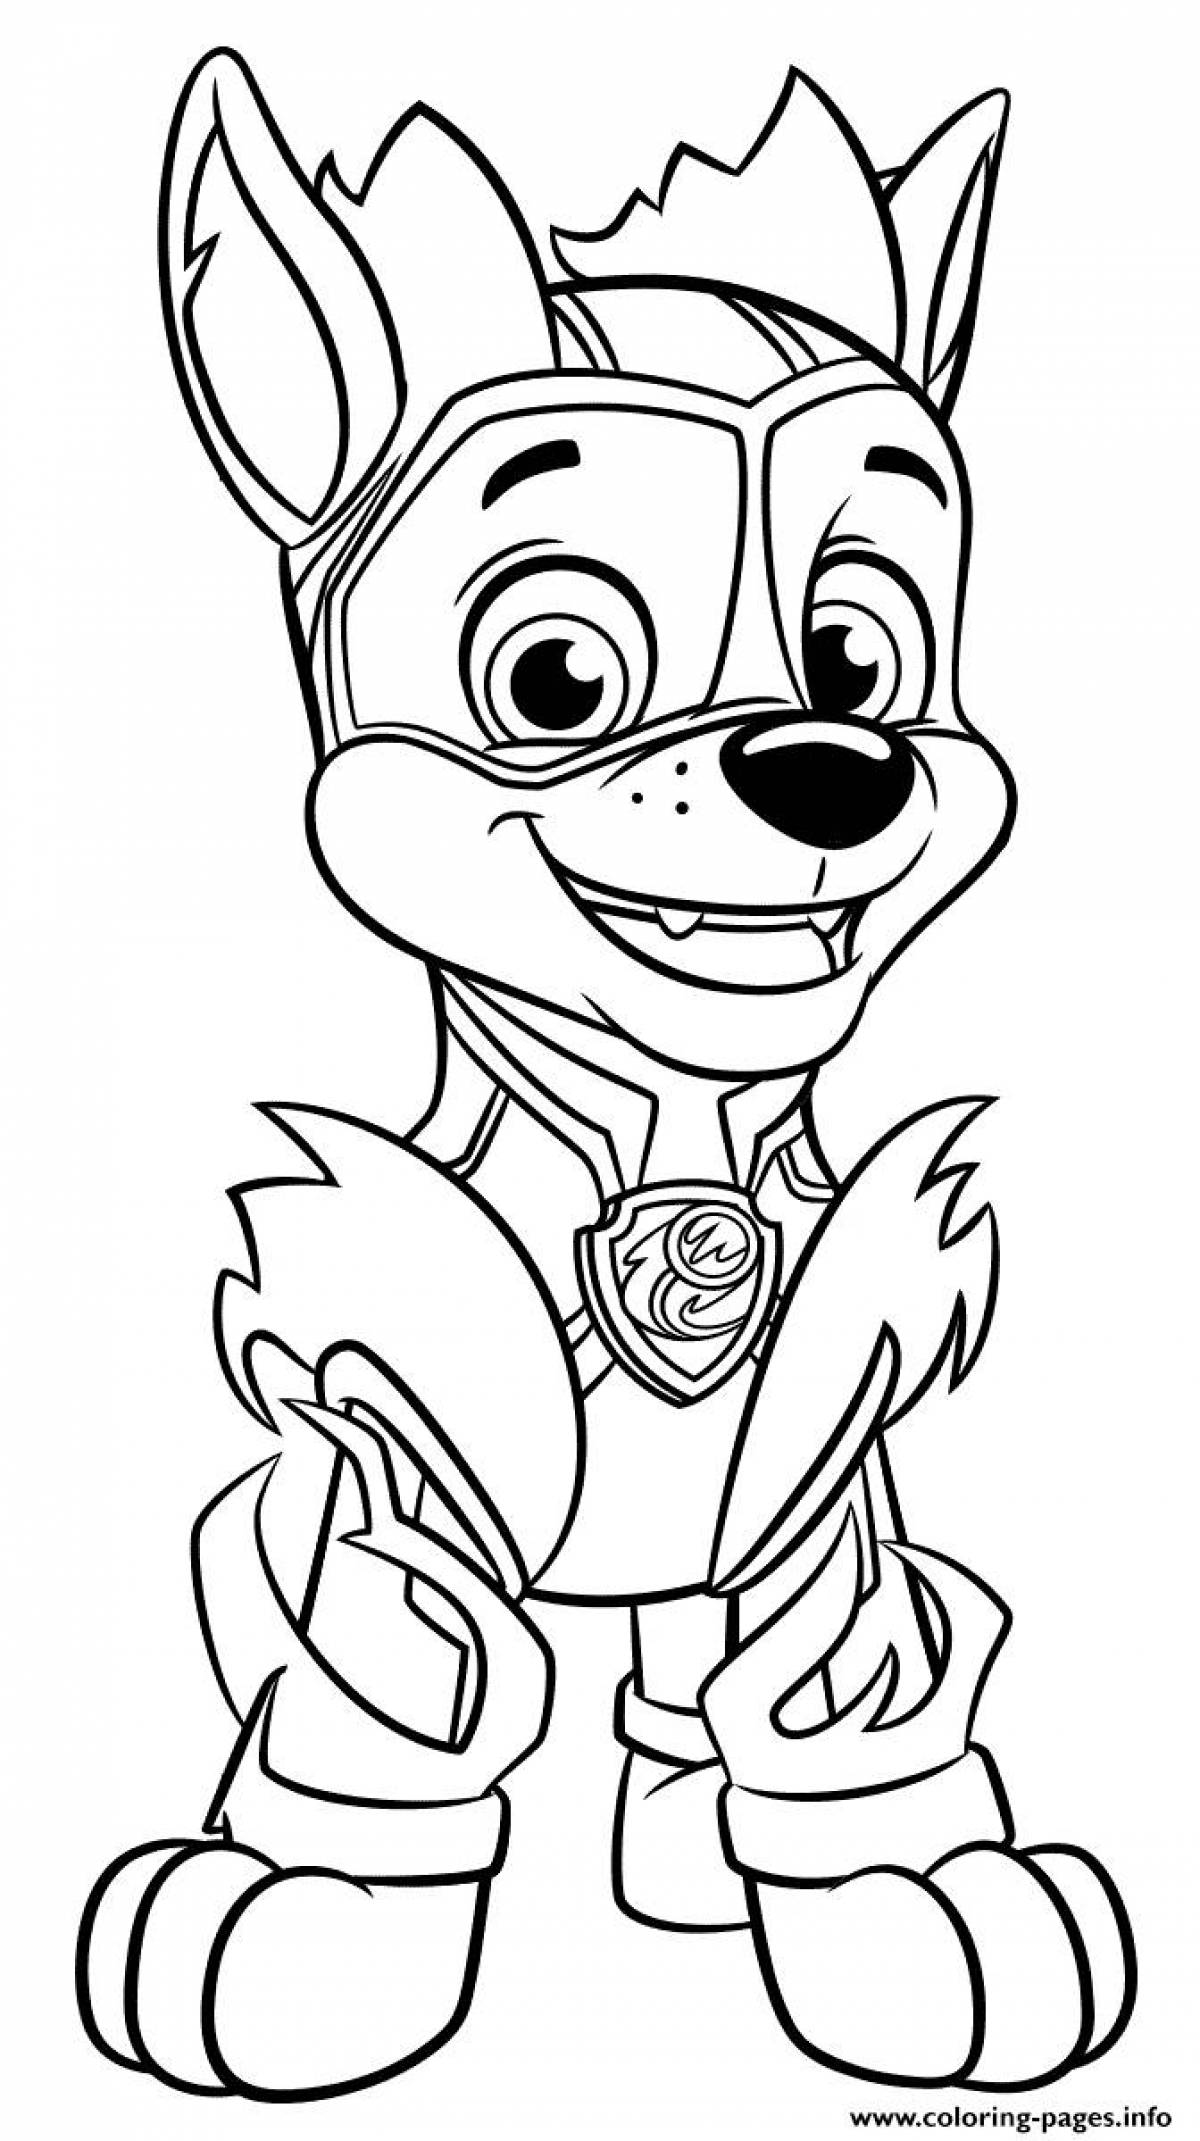 Majestic coloring page paw patrol racer